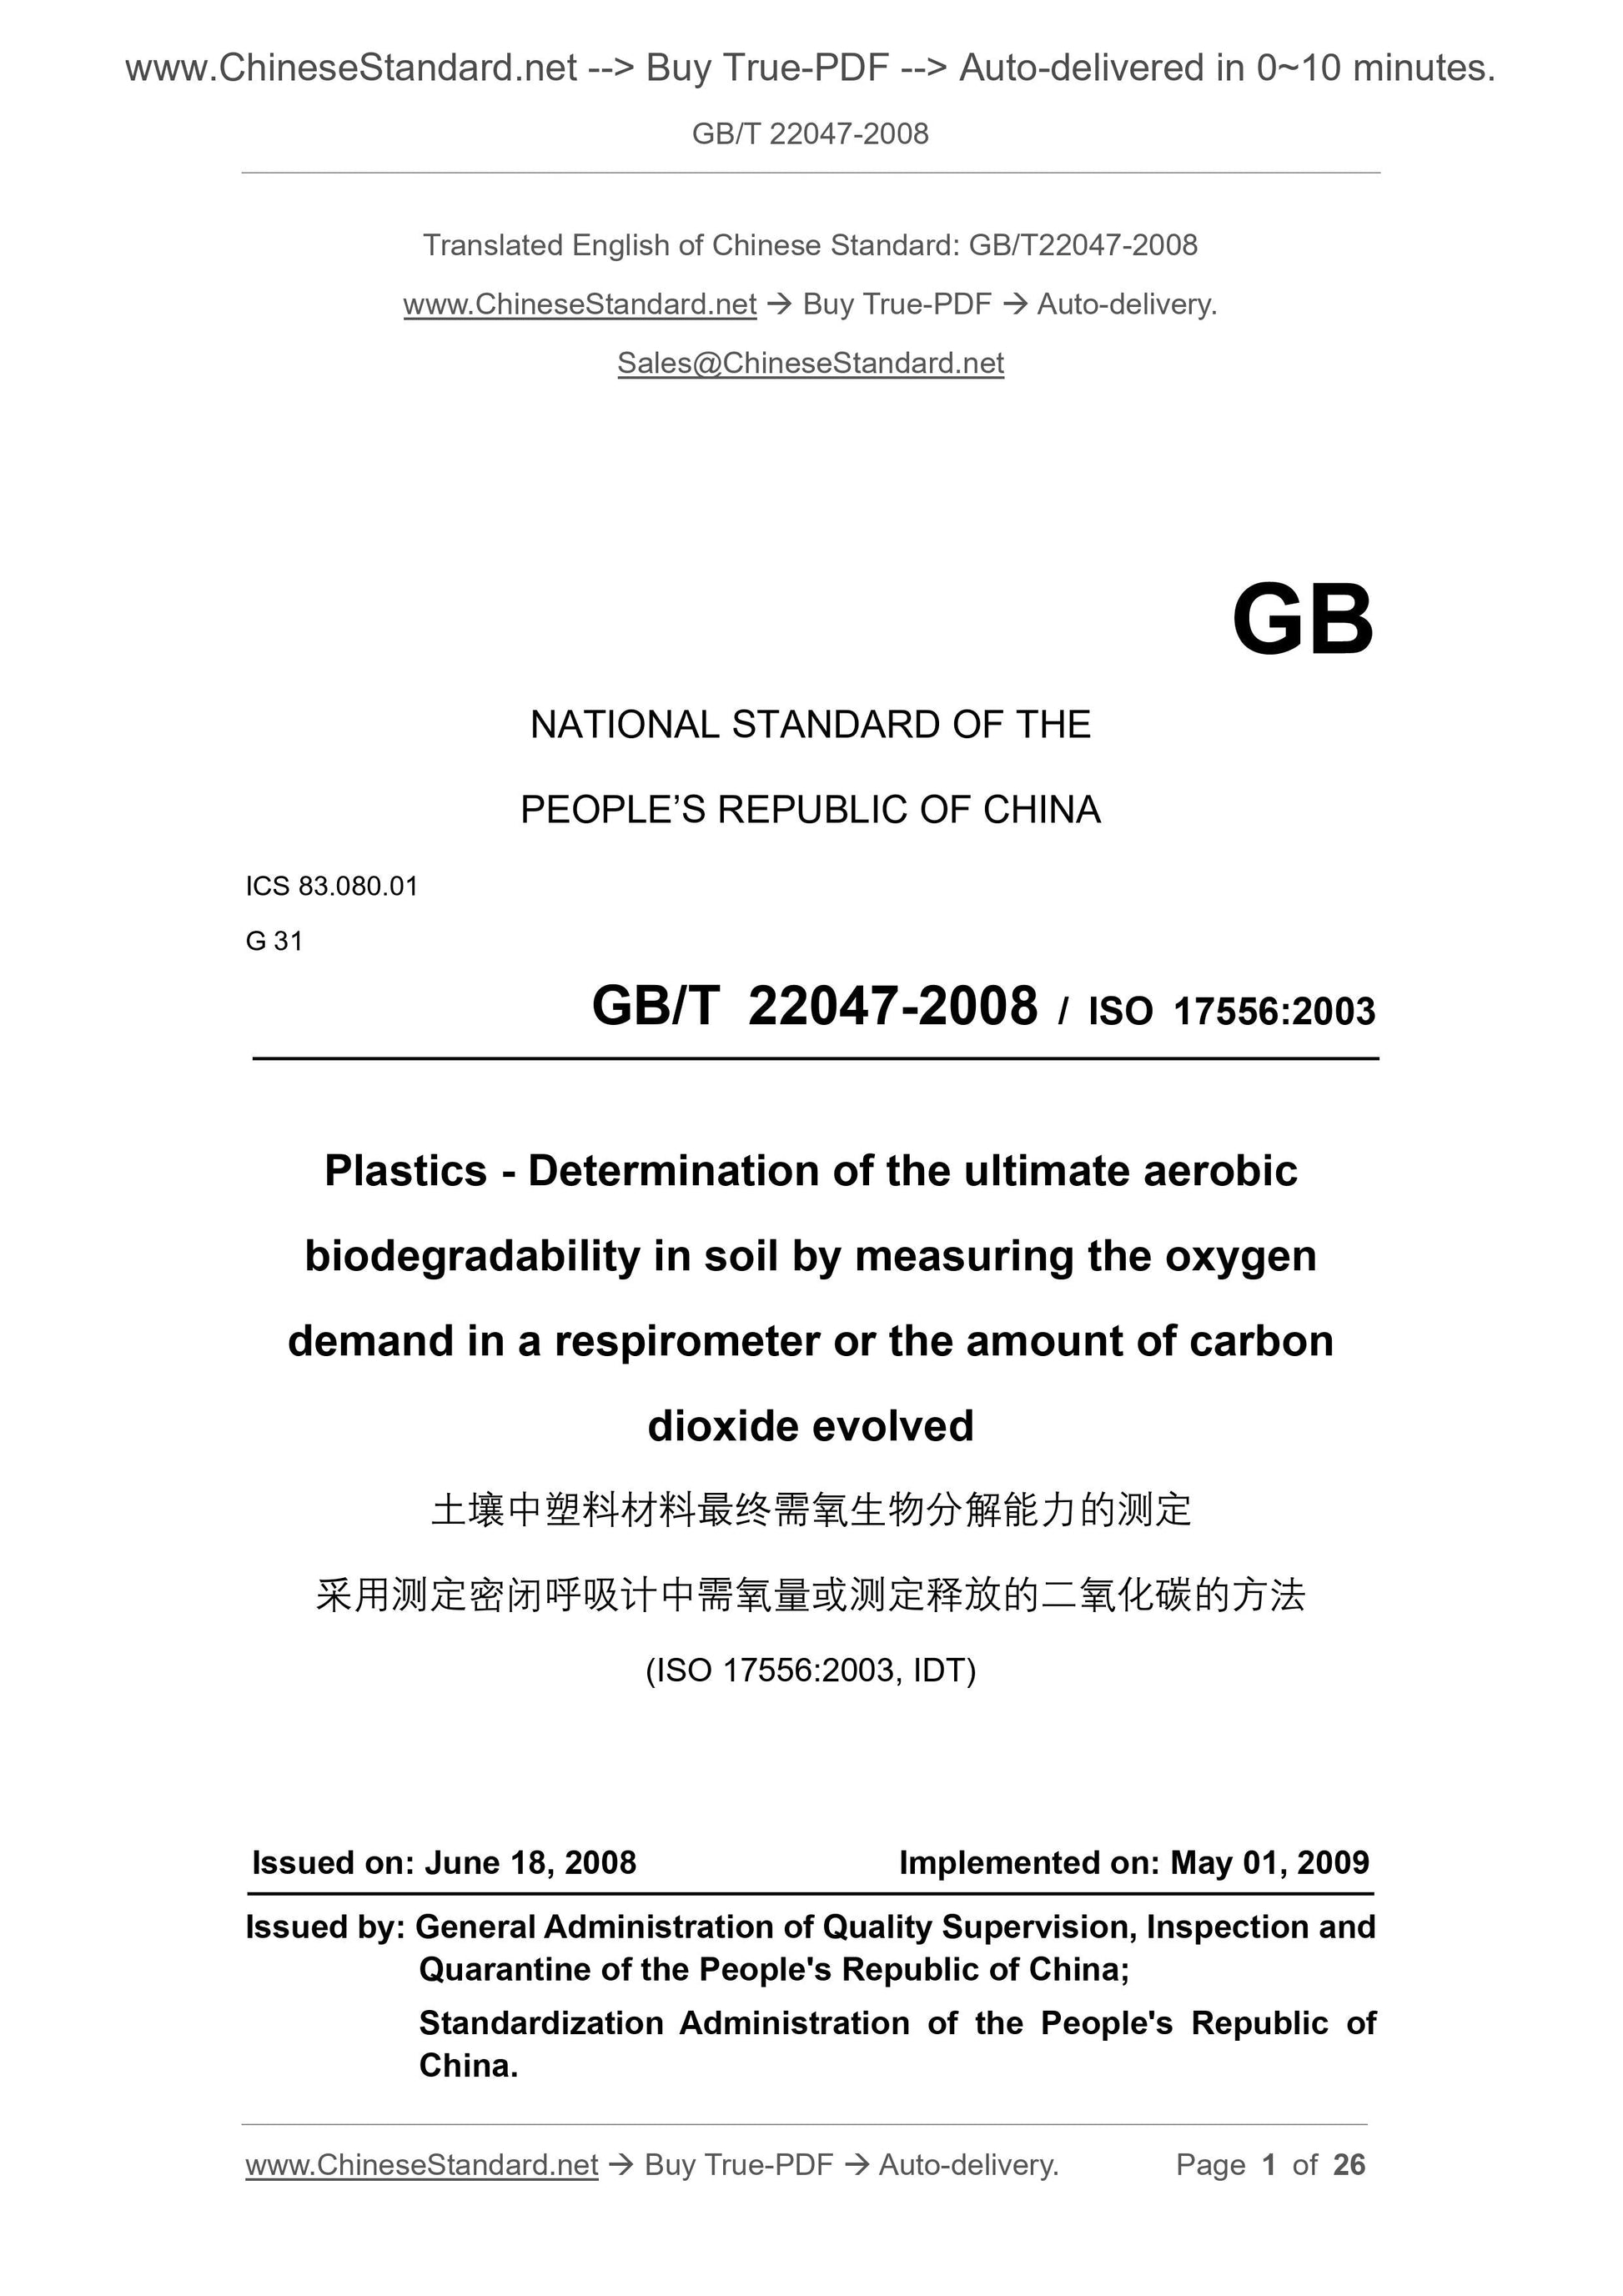 GB/T 22047-2008 Page 1